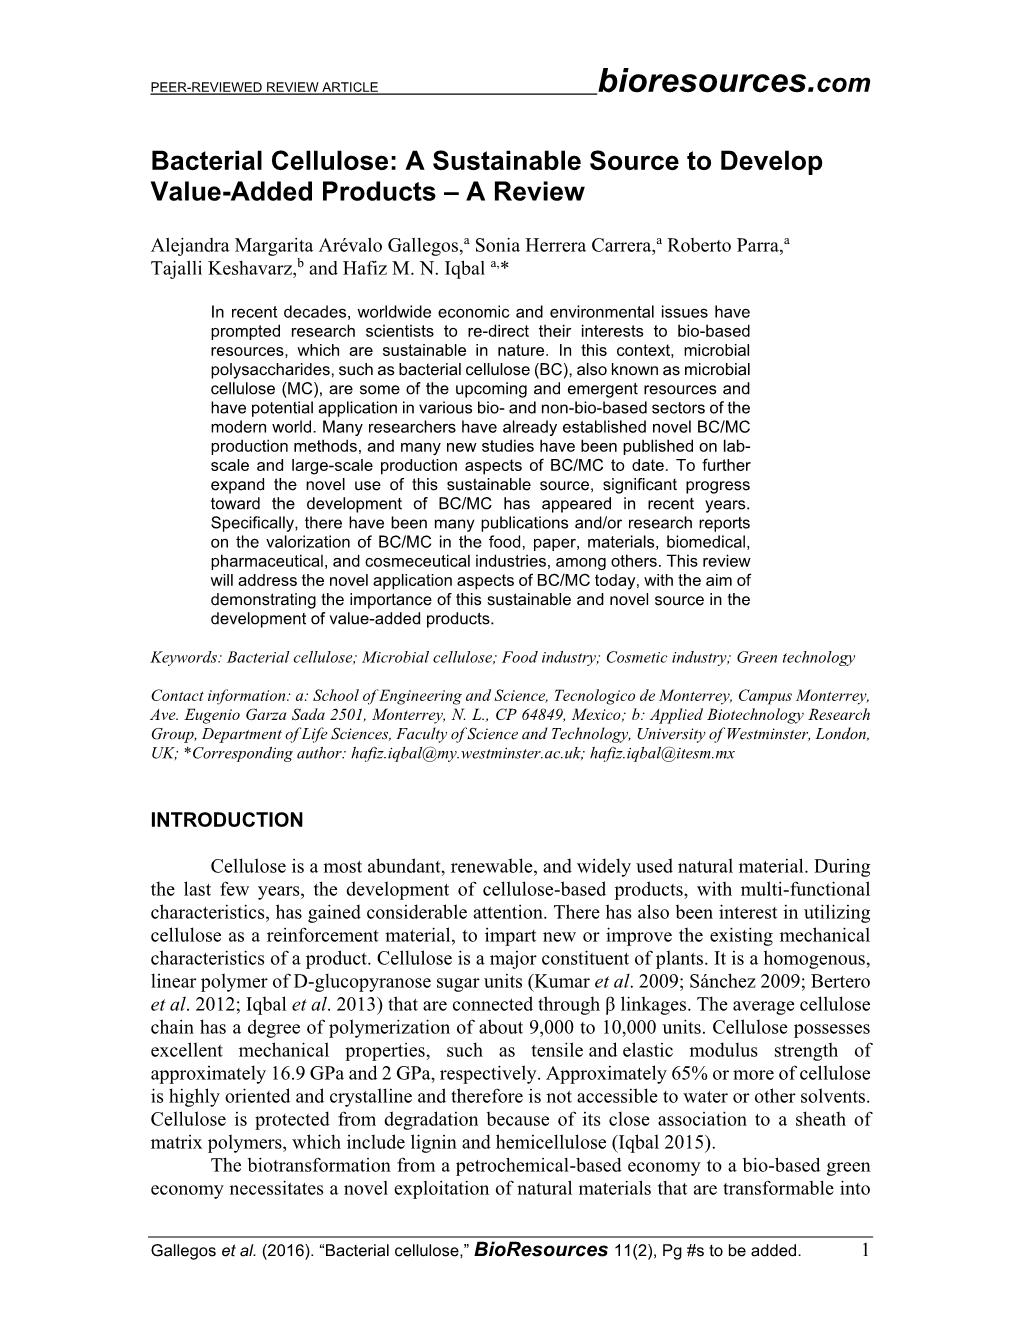 A Sustainable Source to Develop Value-Added Products – a Review